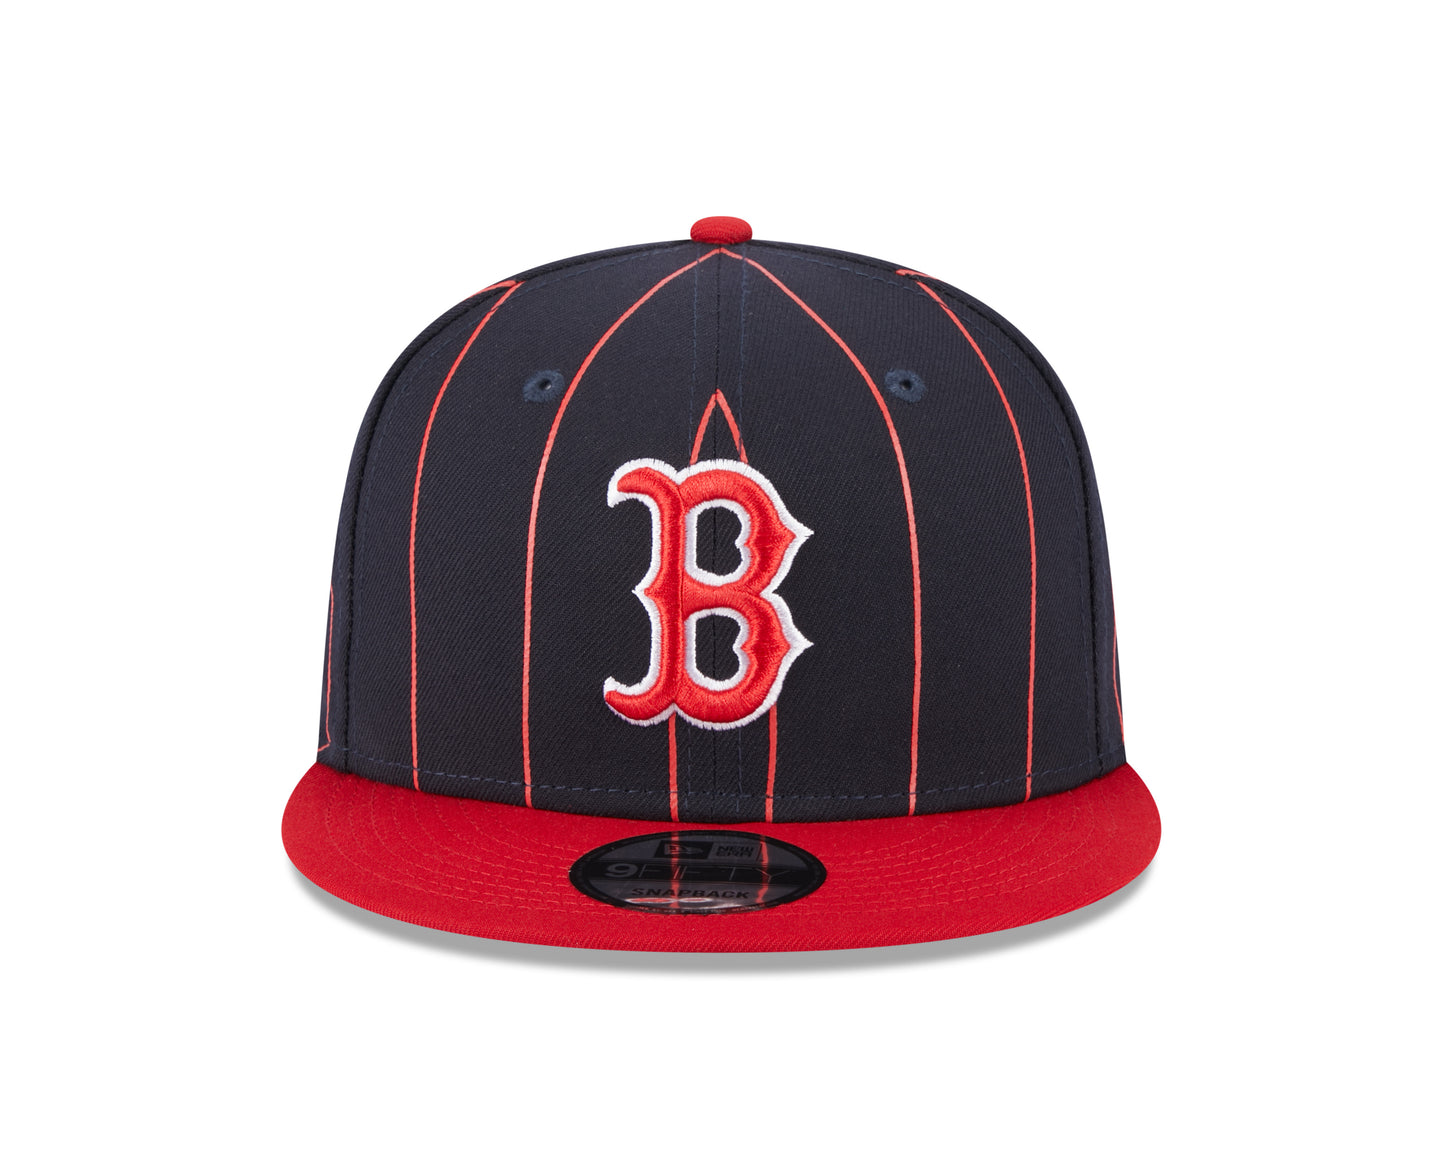 Boston Red Sox Navy/Red Vintage New Era 9FIFTY Snapback Hat